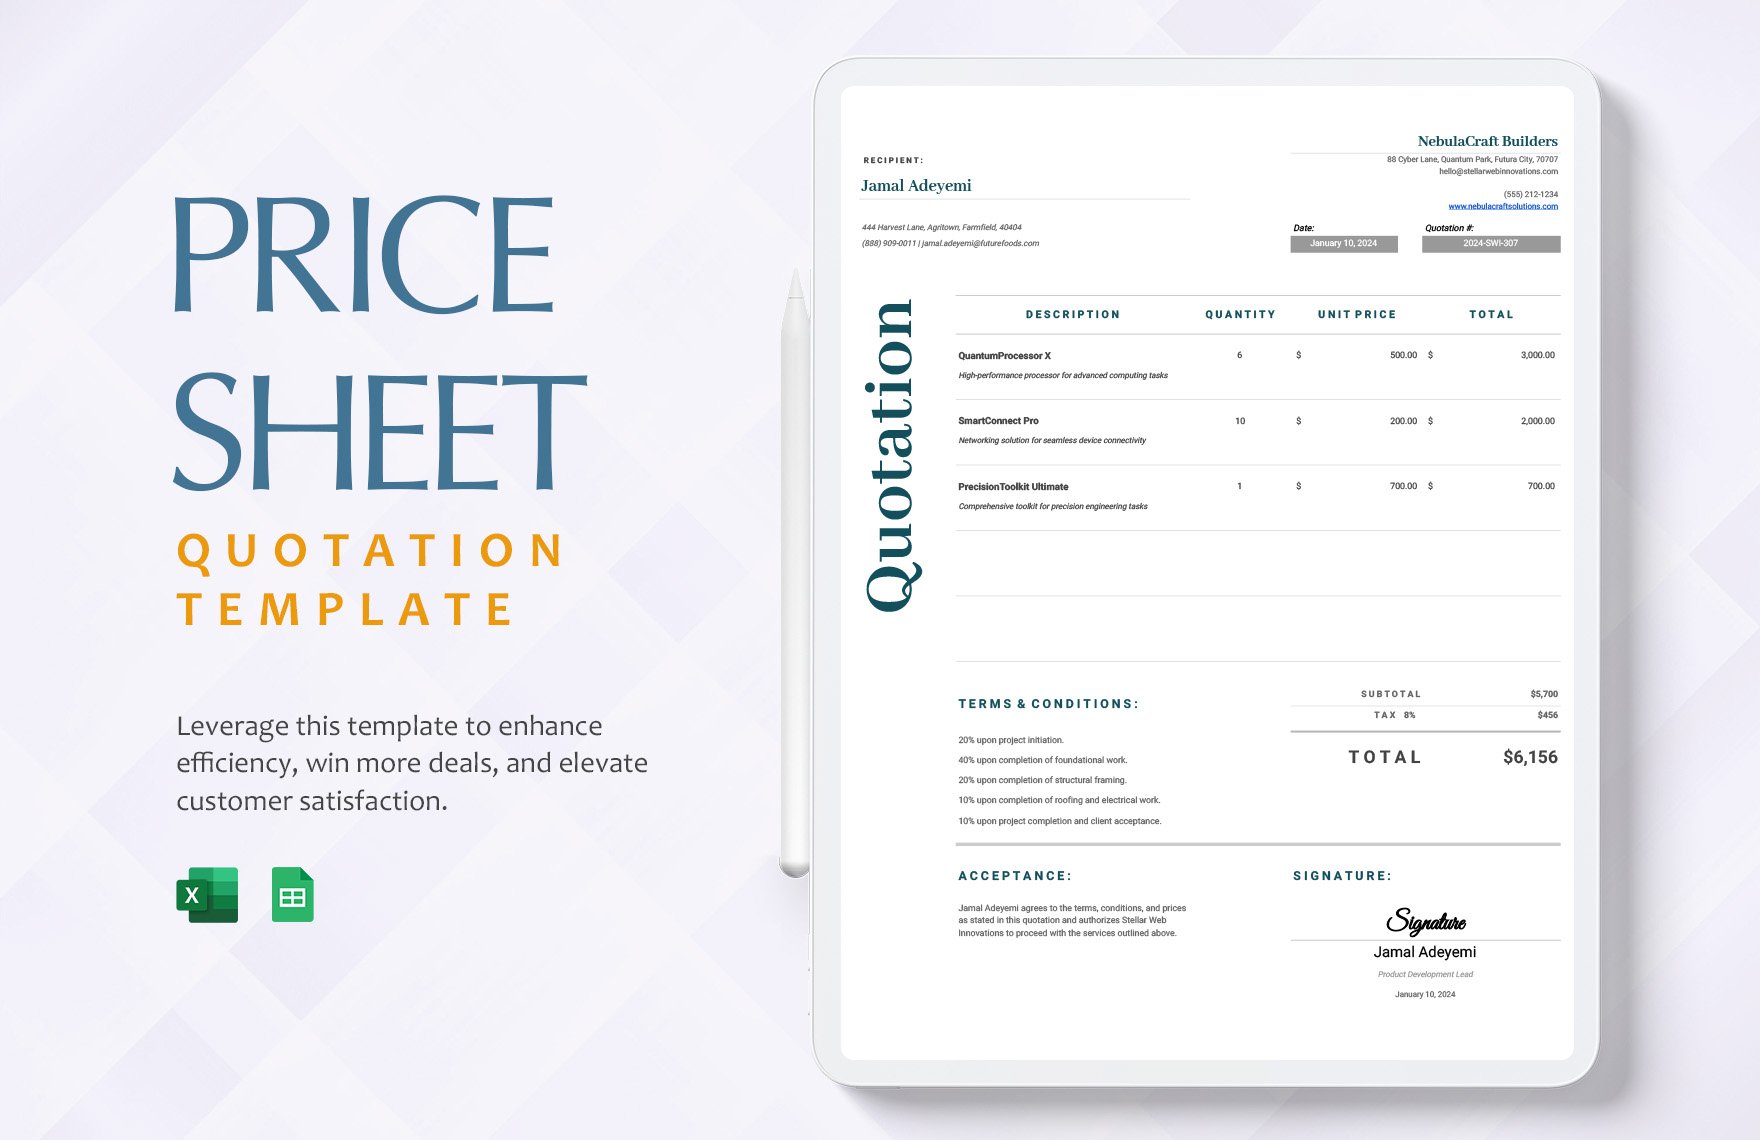 Price Sheet Quotation Template in Excel, Google Sheets